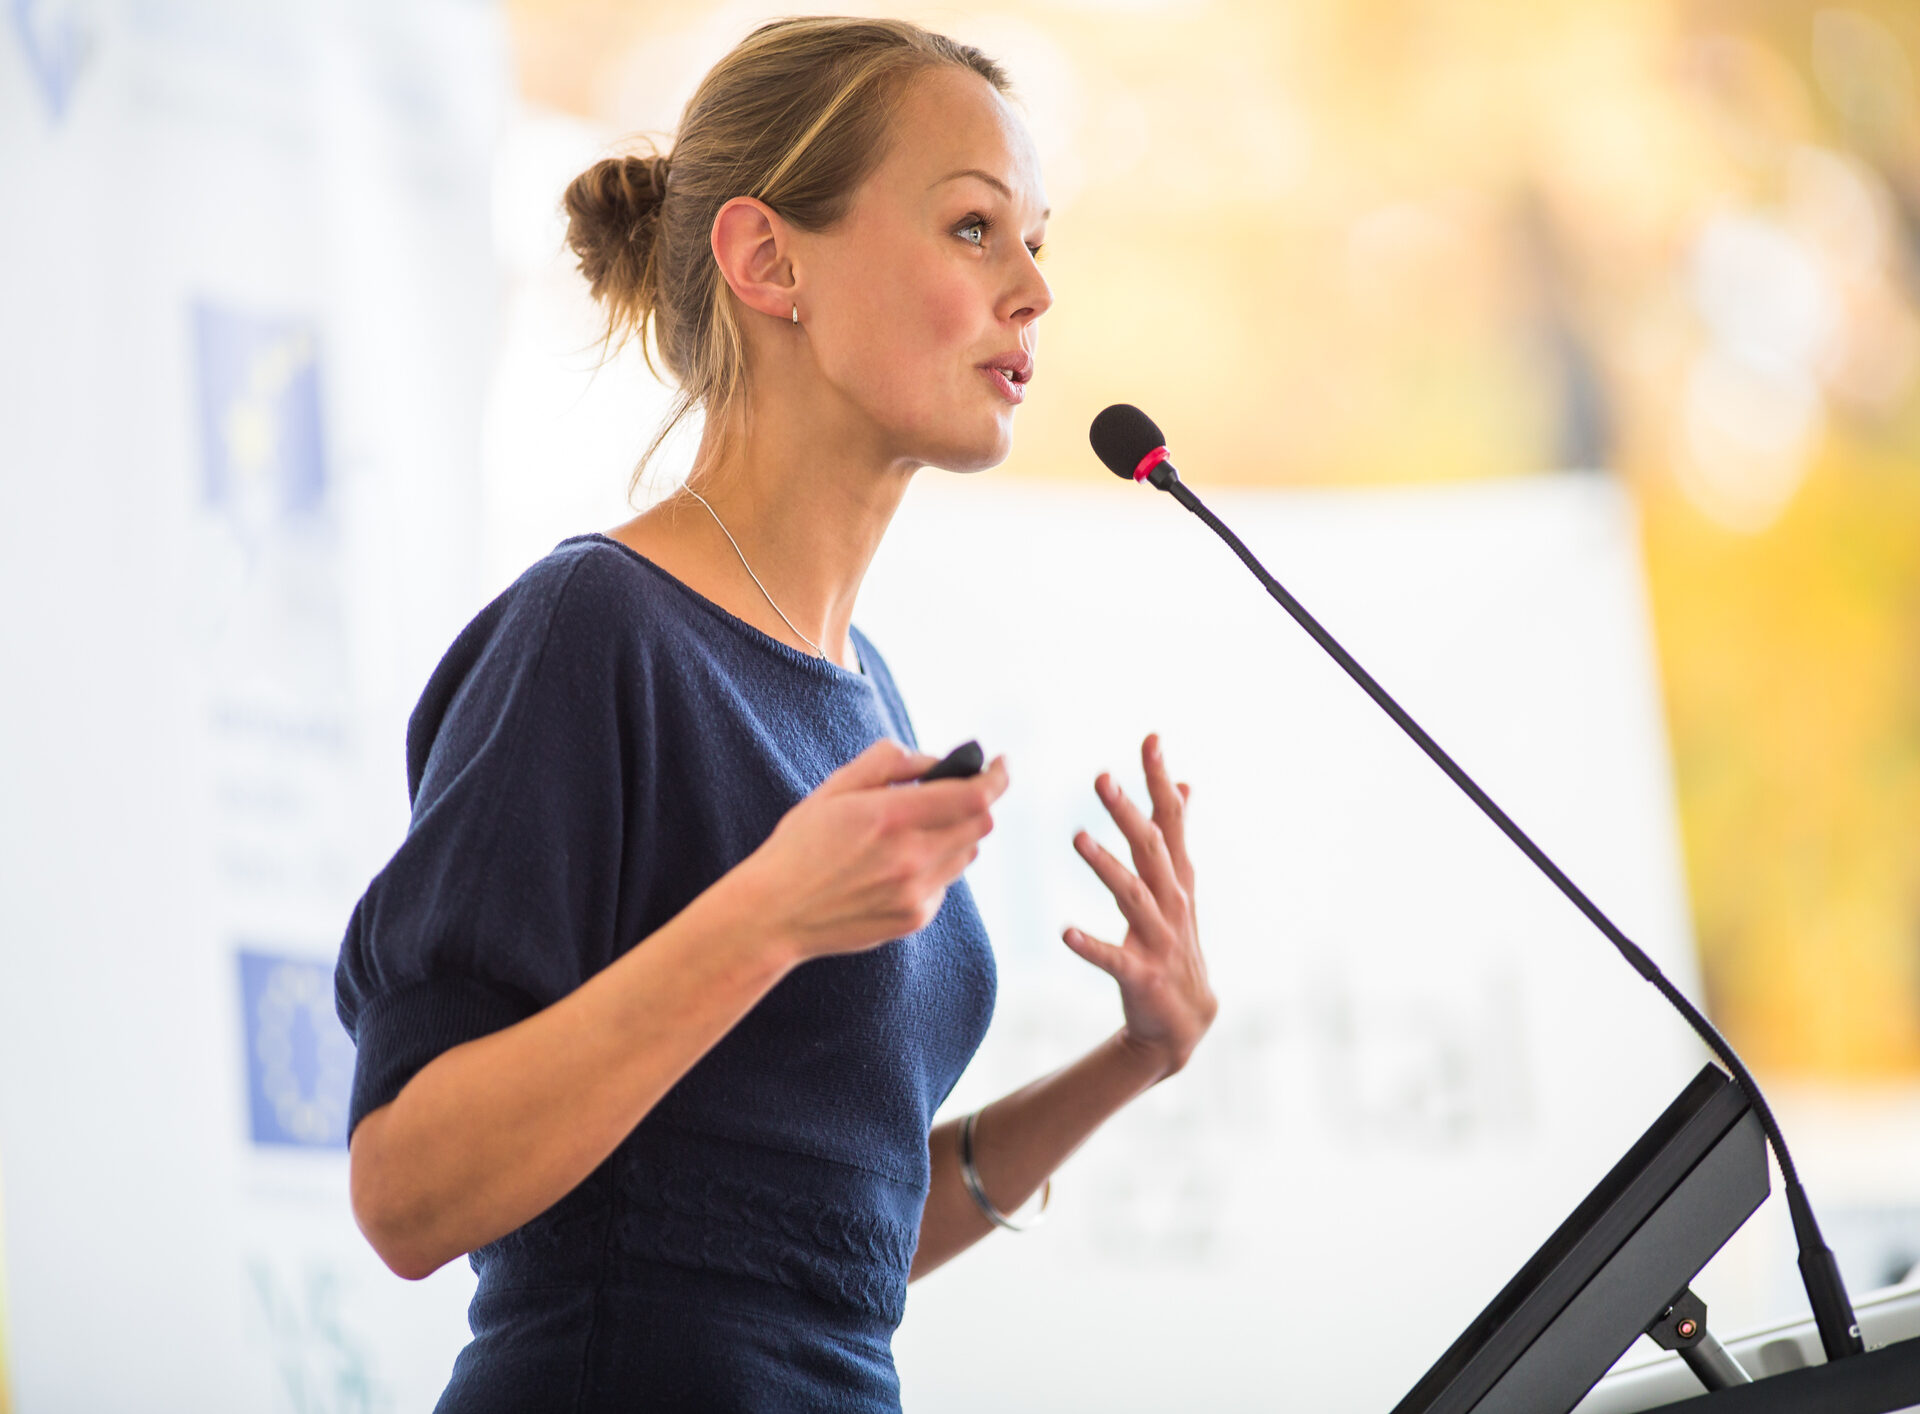 Business woman giving a presentation in a conference/meeting setting